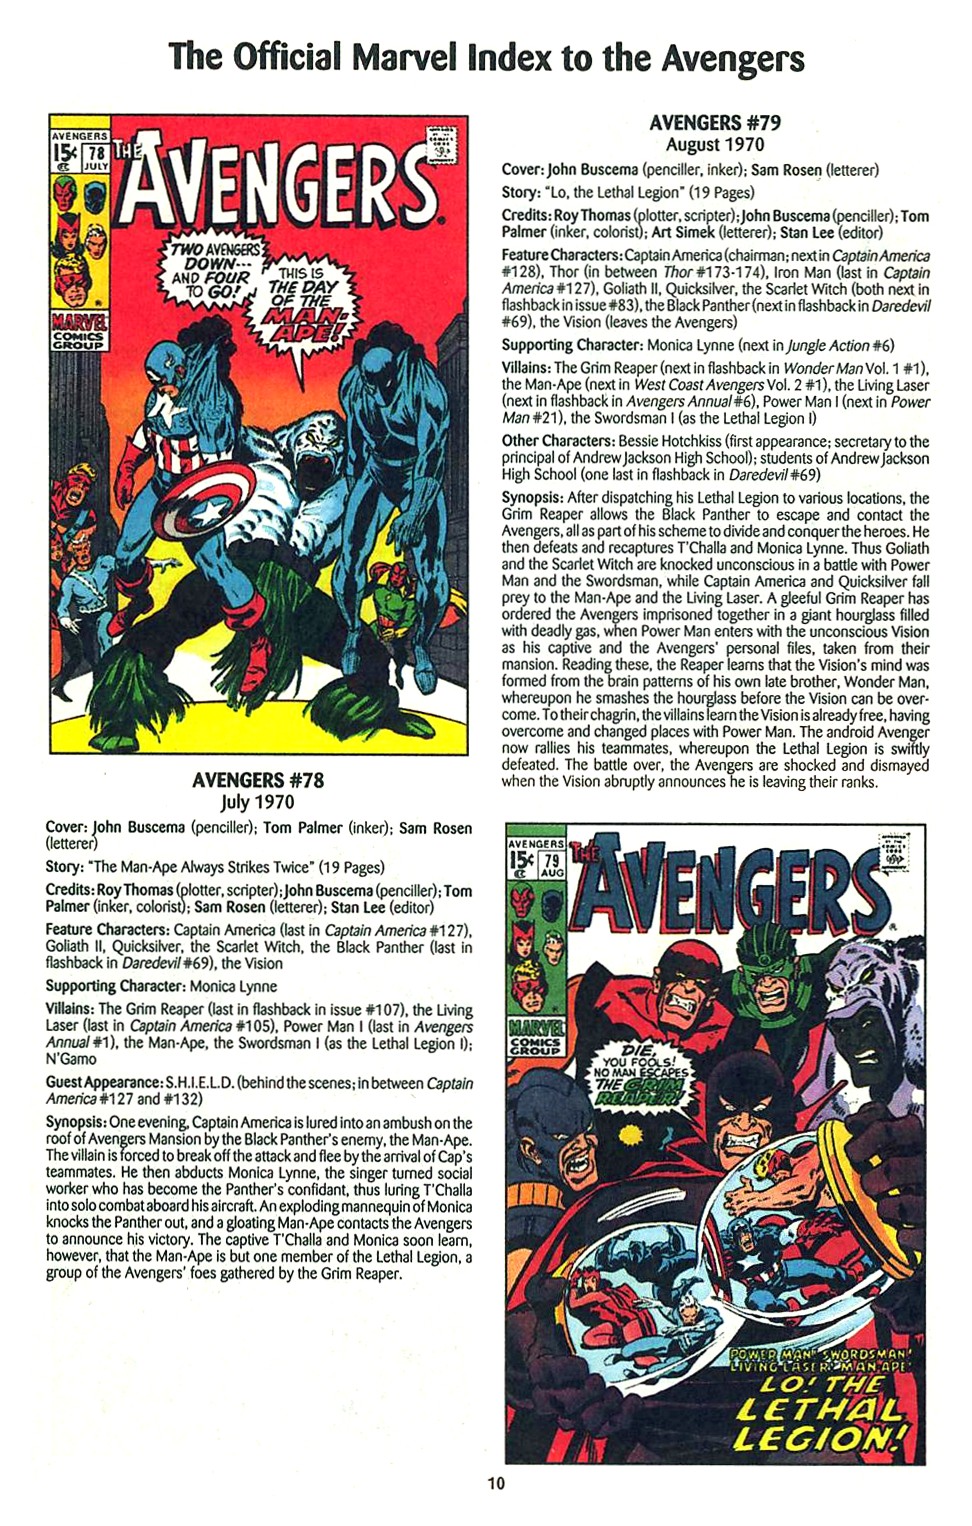 Read online The Official Marvel Index to the Avengers comic -  Issue #2 - 12